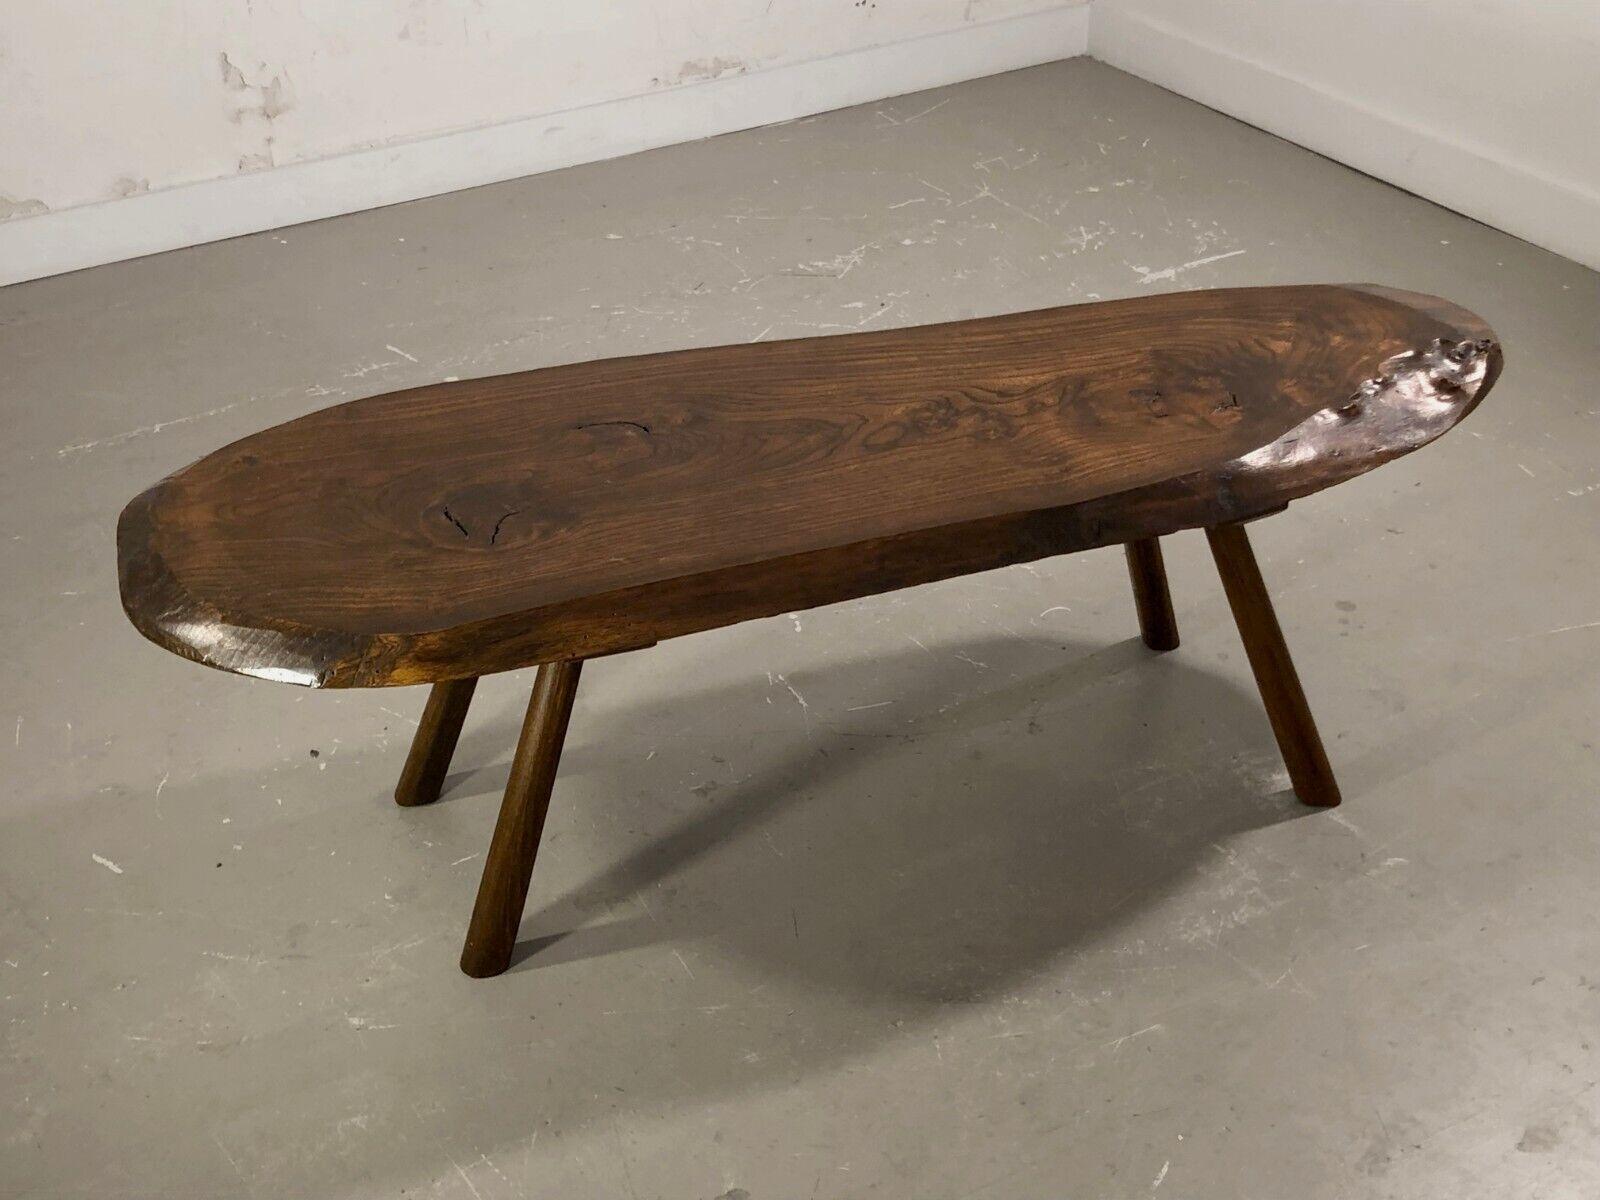 A wide free-form coffee table in the spirit of George Nakashima. Made in France by anonymous artist. A spectacular slice of tree forms the sensual top of this table, including its surrounding bark and internal veinures, fixed on 4 dynamic conical